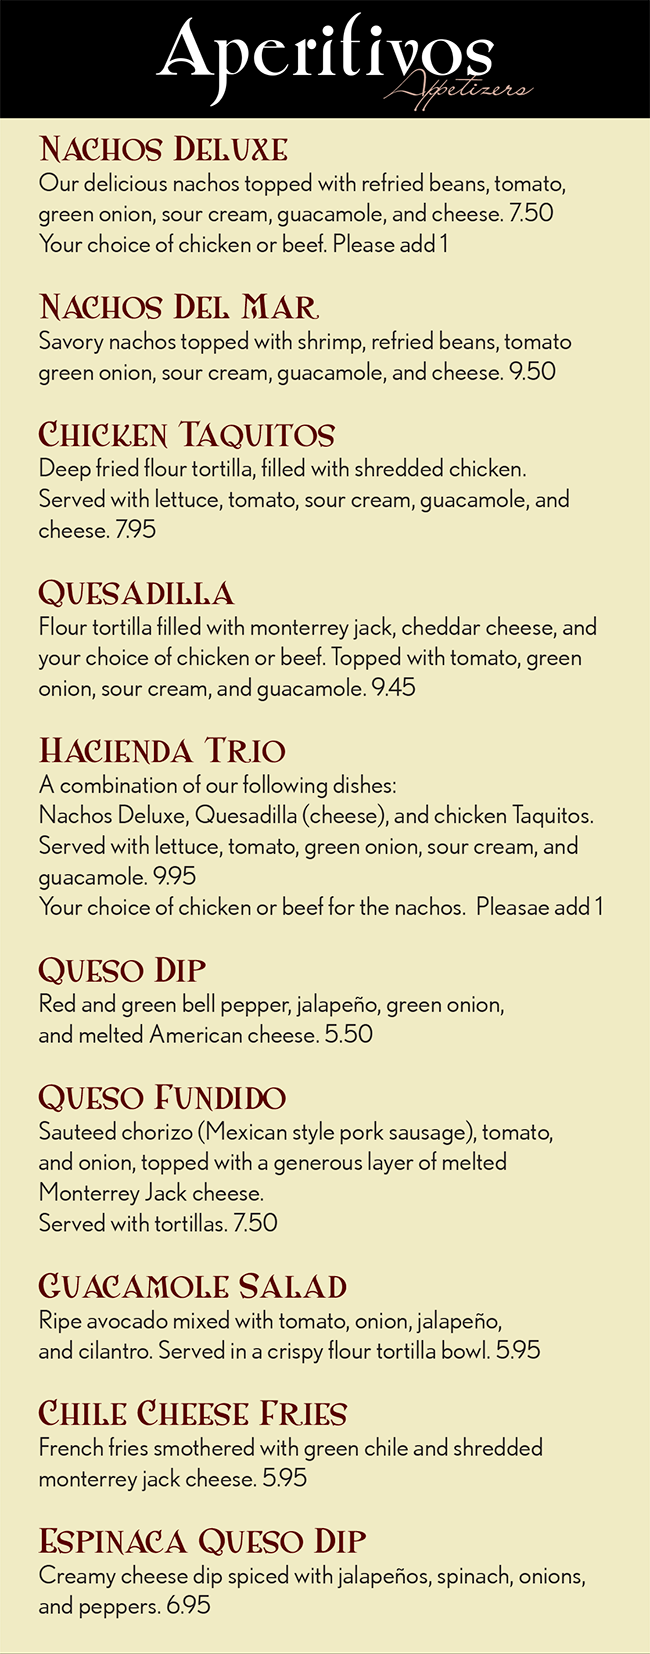 Hacienda Real Mexican Restaurant Menu
Aperitivos
                              Appetizers

Nachos Deluxe
Our delicious nachos topped with refried beans, tomato, green onion, sour cream, guacamole, and cheese. 7.50
Your choice of chicken or beef. Please add 1

Nachos Del Mar
Savory nachos topped with shrimp, refried beans, tomato green onion, sour cream, guacamole, and cheese. 9.50

Chicken Taquitos
Deep fried flour tortilla, filled with shredded chicken. 
Served with lettuce, tomato, sour cream, guacamole, and cheese. 7.95

Quesadilla
Flour tortilla filled with monterrey jack, cheddar cheese, and your choice of chicken or beef. Topped with tomato, green onion, sour cream, and guacamole. 9.45

Hacienda Trio
A combination of our following dishes: 
Nachos Deluxe, Quesadilla (cheese), and chicken Taquitos. Served with lettuce, tomato, green onion, sour cream, and guacamole. 9.95
Your choice of chicken or beef for the nachos.  Pleasae add 1

Queso Dip
Red and green bell pepper, jalapeño, green onion, 
and melted American cheese. 5.50

Queso Fundido
Sauteed chorizo (Mexican style pork sausage), tomato, 
and onion, topped with a generous layer of melted 
Monterrey Jack cheese.
Served with tortillas. 7.50

Guacamole Salad
Ripe avocado mixed with tomato, onion, jalapeño, 
and cilantro. Served in a crispy flour tortilla bowl. 5.95

Chile Cheese Fries
French fries smothered with green chile and shredded 
monterrey jack cheese. 5.95

Espinaca Queso Dip
Creamy cheese dip spiced with jalapeños, spinach, onions, and peppers. 6.95
Ensaladas y Tostadas
              Salads        &         Toast

Carreta Salad
Marinated chicken breast grilled over an open flame and served on a bed of mixed salad greens, spinach, tomato, red onion, corn, avocado, asparagus, black beans, corn tortilla chips, and queso fresco. Seasoned with our special house vinaigrette dressing. 10.95

Cancun Salad
Grilled tilapia fillet served on a bed of mixed salad greens, spinach, tomato, red onion, corn, avocado, cucumber, 
mango, and corn tortilla chips.
Seasoned with our savory mango vinaigrette dressing. 10.95

Vallarta Salad
Grilled shrimp served on a bed of mixed salad greens, 
spinach, tomato, red onion, corn, avocado, cucumber, 
asparagus, mango, and corn tortilla chips.
Seasoned with our savory mango vinaigrette dressing. 11.50

Fajita Taco Salad
A savory salad with your choice of grilled marinated chicken or steak served with sauteed tomato, onion, and bell pepper atop a bed of refried beans and mixed salad greens. 
Served in a crispy flour tortilla shell and accompanied with sour cream and guacamole. 9.50

Taco Salad
Our traditional taco salad is served in a crispy flour tortilla shell with refried beans, your choice of shredded chicken, shredded beef, ground beef and mixed salad greens, tomato, cheese and ranchero sauce. Served with sour cream and guacamole. 8.50

Avocado Tostada
A crispy corn tortilla shell topped with your choice of meat, beans and garnished with lettuce, cheese, tomato, sour cream, and avocado slices. 7.95

Tostada Deluxe
A crispy corn tortilla shell topped with your choice of meat, beans and garnished with lettuce, tomato, cheese, sour cream, and guacamole. 7.25

Beans Tostada
A crispy corn tortilla shell topped with  beans, 
and garnished with lettuce, tomato, cheese, sour cream, 
and guacamole. 6.45

Green Salad
Mixed salad greens, tomatoes, and shredded cheese, 
served with a dressing of your choice. 3.95
Sopa De Mariscos
                                            Soup

Sopa De Mariscos
A savory soup made with shrimp, crab legs, clams, octopus, tilapia fillet, and mixed vegetables, slowly cooked in their natural juices, slightly spicy tomato sauce, and spices. 16.95

Sopa De Albondigas
A classic Mexican soup made with ground chicken, cooked with tomato, zucchini, potatoes, carrots, and rice. Served with green onion and avocado. 8.50

Sopa De Tortillas
Corn tortilla soup made with shredded chicken, tomato, green onion, and avocado. Topped with queso fresco. 7.00

Black Bean Soup
Whole black bean soup topped with finely minced tomato, green onion, cilantro, and queso fresco and topped with Monterrey Jack cheese. 6.00

Caldo De Res
An authentic Mexican soup made with beef tenderloin, zucchini, potatoes, and carrots cooked in beef broth. Served with onion, cilantro, and jalapeño. 9.00

Menudo
A traditional Mexican soup made of beef tripe and hominy cooked in broth seasoned with red chile. Served with onion, oregano, and crushed red chile pepper. 8.50
Huevos
                                          Eggs

Breakfast dishes are served all day. The Huevos dishes are served with rice, beans, and tortillas upon request.

Machaca Con Huevos
Scrambled eggs cooked with shredded beef, tomato, onion, and bell pepper. 8.95

Huevos Ranchero
Fried eggs served on a corn tortilla, smothered in ranchero salsa. Topped with shredded cheese. 8.55

Chorizo Con Huevos
Scrambled eggs cooked with chorizo (Mexican-style pork sausage), tomato, and green onion. 8.95

Chorizo and Egg Burrito
A flour tortilla filled with chorizo (Mexican-style pork sausage), eggs, tomatoes, and green onions, and smothered in red sauce and Monterrey Jack cheese. Served with rice and beans. 8.95

Traditional 
Mexican Cuisine

Whether you’ve been craving a chile verde burrito or a chipotle enchilada, you’ll find the perfect solution to your food quest at Hacienda Real. Featuring authentic Mexican cuisine and a full bar, you can kick back and relax while enjoying delicious food and company!
Burritos

Carne Asada Burrito
A flour tortilla filled with carne asada, whole beans, rice, tomato, onion, and cilantro. Topped with guacamole and ranchero sauce. Served with lettuce and shredded cheese. 12.95

Fajita Burrito (Chicken or Steak)
A flour tortilla filled with seasoned fajita chicken or steak, bell pepper, tomato, onion, rice, and beans. Topped with ranchero sauce, melted cheddar cheese, lettuce, sour cream, and guacamole. 12.95

Burrito Grande
A flour tortilla filled with your choice of shredded chicken, shredded beef, ground beef or pork, with rice and beans inside. Topped with ranchero sauce, sour cream, guacamole, and shredded cheese. Served with lettuce, tomato, and onion. 10.95

Colorado Burrito
A flour tortilla filled with chunks top sirloin slowly simmered and topped with chile Colorado sauce. Served with rice and beans. 9.95

Chile Verde Burrito
A flour tortilla filled with chunks of pork slowly simmered in and topped with a green tomatillo sauce. Served with rice and beans. 9.95

Carnitas Burrito
A flour tortilla filled with chunks of pork cooked in its natural juices, rice, and beans. Topped with green chile and pico de gallo. Served with lettuce and guacamole.12.95

Bean and Beef Burrito
A flour tortilla filled with beans and ground beef. Topped with ranchero sauce and a blend of melted Monterrey Jack and cheddar cheese. Served with rice and beans. 8.95

Bean and Cheese Burrito
A flour tortilla filled with beans and cheese. Topped with ranchero sauce and blend of melted Monterrey Jack and cheddar cheese. Served with rice and beans. 8.25

Add green chile for $1
Enchiladas
Enchilada dishes are served with rice and beans.

Hacienda Enchiladas
A true Mexican recipe! Two corn tortillas filled with chunks of pork, slowly cooked in its natural juices. Topped with green chile and Monterrey Jack cheese. 9.95

Enchiladas Suizas
Authentic enchiladas! Two corn tortillas filled with your choice of cheese, shredded chicken, shredded beef, ground beef or pork. Topped with sauteed onion and bell pepper, green tomatillo sauce, Monterrey Jack cheese, and sour cream. 9.55

Enchiladas De Mole
Two corn tortillas filled with shredded chicken cooked in dark mole chile sauce, complemented with the slight flavors of peanuts and a hint of dark chocolate. Served with sour cream. This is a unique, yet delectable blend of flavors. 9.95

Poblano Enchiladas
Two corn tortillas filled with shredded chicken, and topped with sour cream poblano sauce 9.95

Enchiladas Verdes
Two corn tortillas filled with your choice of cheese, shredded chicken, shredded beef, ground beef or pork. Topped with green tomatillo sauce and queso fresco. 9.95

Chipotle Enchiladas
Two corn tortillas filled with your choice of cheese shredded chicken, shredded beef, ground beef or pork, topped with creamy chipotle sauce and Monterrey Jack cheese. 9.95
Fajitas

This classic Mexican dish is served grilled and sizzling hot with sauteed tomato, onion, and bell pepper with your 
choice of Chicken, Steak, or Pork.
Served with rice beans, sour cream, guacamole, and tortillas.
For shrimp, please add $1.

Fajitas                           1 Person    2 People
Created with your choice of ONE item	     13.95	     24.95 

Combo Fajitas
Created with your choice of TWO items	    15.95	     26.95

Hacienda Fajitas
Created with your choice of THREE items         17.95 	     28.95

Make it Monterrey style for 1.50
Tacos Al Carbon

The Tacos Hacienda dishes are served with rice and beans.

Tacos Al Carbon
Tender flame-broiled skirt steak, sliced and grilled with tomato and onion, then folded into three soft corn tortillas dipped into a slightly spicy tomato sauce, topped with cilantro, guacamole, and queso fresco 14.95

Tacos De Pollo Asado
Tender flame-broiled marinated chicken, sliced and grilled with tomato and onion, then folded into three soft corn tortillas dipped into a slightly spicy tomato sauce. Topped with cilantro and queso fresco.
Served with guacamole. 14.95

Tacos De Camaron
Three flour tortillas filled with sautéed shrimp, tomato and onion. Topped with lettuce, tomato, and cheese.  14.95

Fish Tacos
Three Flour tortillas filled with grilled tilapia fillet. Topped with lettuce, tomato, and cheese. 14.95

Tacos Tradicionales
These items are not served with rice or beans. 
3 Tacos de Carne Asada (Grilled Steak) 	7.50
3 Tacos de Pollo Asado (Grilled Chicken) 	7.50
3 Tacos Al Pastor (Marinated Pork) 		7.50
3 Tacos de Camaron (Shrimp) 			7.95
3 Tacos de Pescado (Fish) 			7.95
Pollo
                                      Chicken
The Pollo dishes are served with rice, beans, and tortillas upon request.

Pollo Chipotle
Tender slices of boneless chicken breast, onion, and mushrooms sauteed on tantalizing butter and creamy chipotle sauce. Served with lettuce, tomato slices, and cheese. 13.95

Pollo A La Crema
Tender slices of chicken breast, onion, mushrooms, and red and green peppers sauteed in authentic Mexican cream sauce. Served with Mexican-style coleslaw.13.95

Pollo En Mole
A classic Mexican dish! Sauteed slices of chicken breast cooked in dark mole chile sauce, complemented with the slight flavor of peanuts and a hint of dark chocolate. This is quite a unique, yet delectable blend of flavors! 13.95

Pollo Asado
Marinated boneless chicken breasts grilledopen flame. Served with lettuce, tomato, and guacamole. 13.95

Carnitas De Pollo
Slices of marinated boneless chicken breast cooked with tomato, onion, and red and green peppers in our house salsa. Served with lettuce, tomato and guacamole. 13.95

Arroz Con Pollo
Slices of tender chicken breast sauteed with onion and mushrooms in slightly spicy tomato sauce served over a bed of rice and melted cheese. Topped with green onion and black olives. This dish is not served with beans. 13.95
Carnes
                                         Meat
The carnes dishes are served with rice, beans, and tortillas upon request.

Steak A La Tampiqueña
Tender skirt steak (6 oz) grilled over an open flame and topped with shrimp and a slightly spicy cream sauce. Served with lettuce, tomato, and cheese. 14.95

Carne Asada
Tender skirt steak grilled over an open flame. Served with lettuce, tomato, and guacamole. 13.95

Carnitas De Res
Top sirloin strips and sautéed with green pepper and onions, cooked in a slightly spicy salsa. Served with lettuce, tomato, and guacamole. 13.95

Chile Verde
Chunks of pork slowly simmered in green tomatillo sauce until very tender. Served with Mexican-style coleslaw. 13.95

Pork Carnitas
A true recipe! Chunks of pork slowly cooked in its natural juices. Served with pico de gallo and spicy habanero sauce. 13.95

Chile Colorado
Chunks of sirloin slowly simmered in red chile sauce until very tender. Served with Mexican-style coleslaw. 13.95
Mariscos
                                       Seafood
The Mariscos dishes are served with arroz blanco (Mexican-style white rice) and mixed salad greens.

Camarones A La Crema
Large shrimp, onion, mushrooms, and green pepper sautéed in authentic Mexican cream sauce. 14.95

Camarones Al Mojo De Ajo
Large savory shrimp, onion, and mushroom sautéed and served in garlic and butter sauce. 14.95

Arroz Con Camarones
Large savory shrimp, onion, and mushrooms in slightly spicy tomato sauce, served over a bed of rice and melted cheese. Topped with green onion and black olives. This dish is not served with beans. 14.95

Seafood Chimchanga
Delectable crab and shrimp sautéed with tomato, green onion, and mushroom in cream sauce, then rolled into a flour tortilla and deep fried. Topped with sour cream, guacamole, and green tomatillo sauce. 14.50

Shrimp Cocktail
Large shrimp cooked in their natural juices, slightly spicy tomato sauce, and spices. Served in a large goblet with diced tomato, onion, cilantro, and avocado. This dish is not served with arroz blanco and mixed salad greens. 14.50

Campechana Cocktail
Large shrimp and octopus cooked in their natural juices, slightly spicy tomato sauce, and spices. Served in a large goblet with diced tomato, onion, cilantro, and avocado. This dish is not served with arroz blanco and mixed salad greens. 14.95

Camarones Con Vegetales
Large shrimp with sautéed vegetables including tomato, onion, bell pepper, mushrooms, broccoli, cauliflower, and carrots sautéed in slightly spicy tomato sauce. 14.95

Camarones Speciales
Seven deep-fried prawns filled with Monterrey Jack cheese then wrapped in bacon. 14.95

Camarones Al La Diabla
Large savory shrimp sautéed and served in slightly spicy red hot sauce. 14.95

Seafood Enchiladas
Two corn tortillas filled your choice of crab, shrimp, or a combination of both, sautéed with tomatoes, green onions, and cream sauce, topped with green tomatillo sauce, cheese, sour cream, and avocado slices. 14.95

Menu items are cooked to order. Consuming raw or undercooked meats may increase your risk of foodborne illness. Please direct any food allergy concerns to your server prior to placing your order.

Vegetariano
                                          Vegetarian

The Vegetariano dishes are served 
with white rice and black beans.

Veggie Fajitas
A savory and healthy choice tomato, onion, bell pepper, mushroom, broccoli, cauliflower, and carrots sautéed in ranchero sauce. Served with sour cream and guacamole. 10.95

Veggie Enchiladas
Two corn tortillas filled with tomato, onion, bell pepper, mushroom, broccoli, cauliflower, and carrots sautéed in a slightly spicy tomato sauce. Topped with enchilada sauce and a blend of melted Monterrey and cheddar cheese. Served with sour and cream and avocado slices. 9.95

Veggie Burrito
Mixed vegetables including tomato, onion, bell pepper, mushrooms, broccoli, cauliflower, and carrots sautéed and wrapped in a flour tortilla. Topped with enchilada sauce and guacamole. 9.95

Spinach Enchiladas
Two corn tortillas filled with sautéed spinach, tomato, onion, and mushrooms. Topped with monterrey jack cheese and our delicious cream sauce. 9.95

Chile Relleno Burrito
Soft cheese chile relleno, white rice, and black beans wrapped inside a flour tortilla. Topped with ranchero sauce, and melted cheese and lettuce. 9.95

Combinaciones
                                          Combinations
These dishes are served with rice and beans.

Build your own: Enchilada, Taco, Burrito, Chalupa, Tostada Substitute any for Tamate, Chile Relleno, or Chimichanga $1 extra

Fillings:  Cheese, Chicken, Ground Beef, Shredded Beef, Pork

Your choice of ONE item 6.95
Your choice of TWO items 8.95
Your choice of THREE item 10.95

Add Green Chile 1   Add Sour Cream and Guacamole 1.50

Favorites

The favoritos dishes are served with rice, beans, and tortillas upon request, unless otherwise indicated.

Hacienda Platter
Grilled skirt steak (6 oz), grilled chicken, and our savory camarones especiales made of large shrimp wrapped with cheese and bacon. Served with lettuce, tomato, and guacamole. 15.50

Cancun Platter
Savory morsels of crab, shrimp, chicken, tomato, green onion, mushrooms, and cilantro sautéed in white wine. Topped with Monterrey Jack cheese and baked to perfection. 15.50

Guadalajara Special
Grilled New York steak, one smothered chile relleno, and one deep fried chicken burrito. Topped with ranchero sauce and sour cream. 14.50

Don Juan Platter
Grilled skirt steak (6 oz), accompanied with a dish of shrimp in garlic sauce cooked with onion and mushrooms. Served with lettuce and guacamole. 15.50

Chicken Flautas
Three rolled corn tortillas filled with shredded chicken and deep fried atop a bed of lettuce. Served with tomato, sour cream, guacamole, and ranchero sauce. This dish is not served with tortillas. 11.50

Mexican Hamburger
A hamburger served in a flour tortilla with refried beans, folded and topped with green chile and shredded Monterrey Jack cheese. Served with rice and salad. 8.95

Molcajete De Carne
Tender grilled morsels of skirt steak, pork, chicken, and nopal (prickly pear cactus) served on a bed of pico de gallo and spicy tomatillo sauce. Topped with cilantro and queso fresco. Served in an authentic Mexican stone mortar. 17.95

Molcajete De Mariscos
Shrimp, octopus, crab legs, tilapia fillet, onion, bell pepper, and mixed vegetable marinated in slightly spicy tomato sauce, and broiled on a low flame until tender. Served in an authentic Mexican stone mortar. 19.45


American Dishes

T-Bone Steak
T-Bone steak grilled over an open flame. Served with French fries and mixed salad greens. 13.95

Hamburger
A hamburger served with lettuce, tomato, sliced onion, and French fries. 6.75

Grilled Chicken Burger
A grilled chicken breast served with cheese, tomato, sliced onion, and French fries. 7.25

Cheese Burger
A hamburger served with lettuce, tomato, sliced onion, cheese, and French fries. 7.25

Postres
                                  Desserts

Sopapillas 2.50
Flan  3.50
Fried Ice Cream  3.95
Churros  3.95
Chimi-Cheesecake
With strawberry topping 3.95
Chabelita
One flan with a scoop of vanilla ice cream, surrounded with sopapillas 6.95